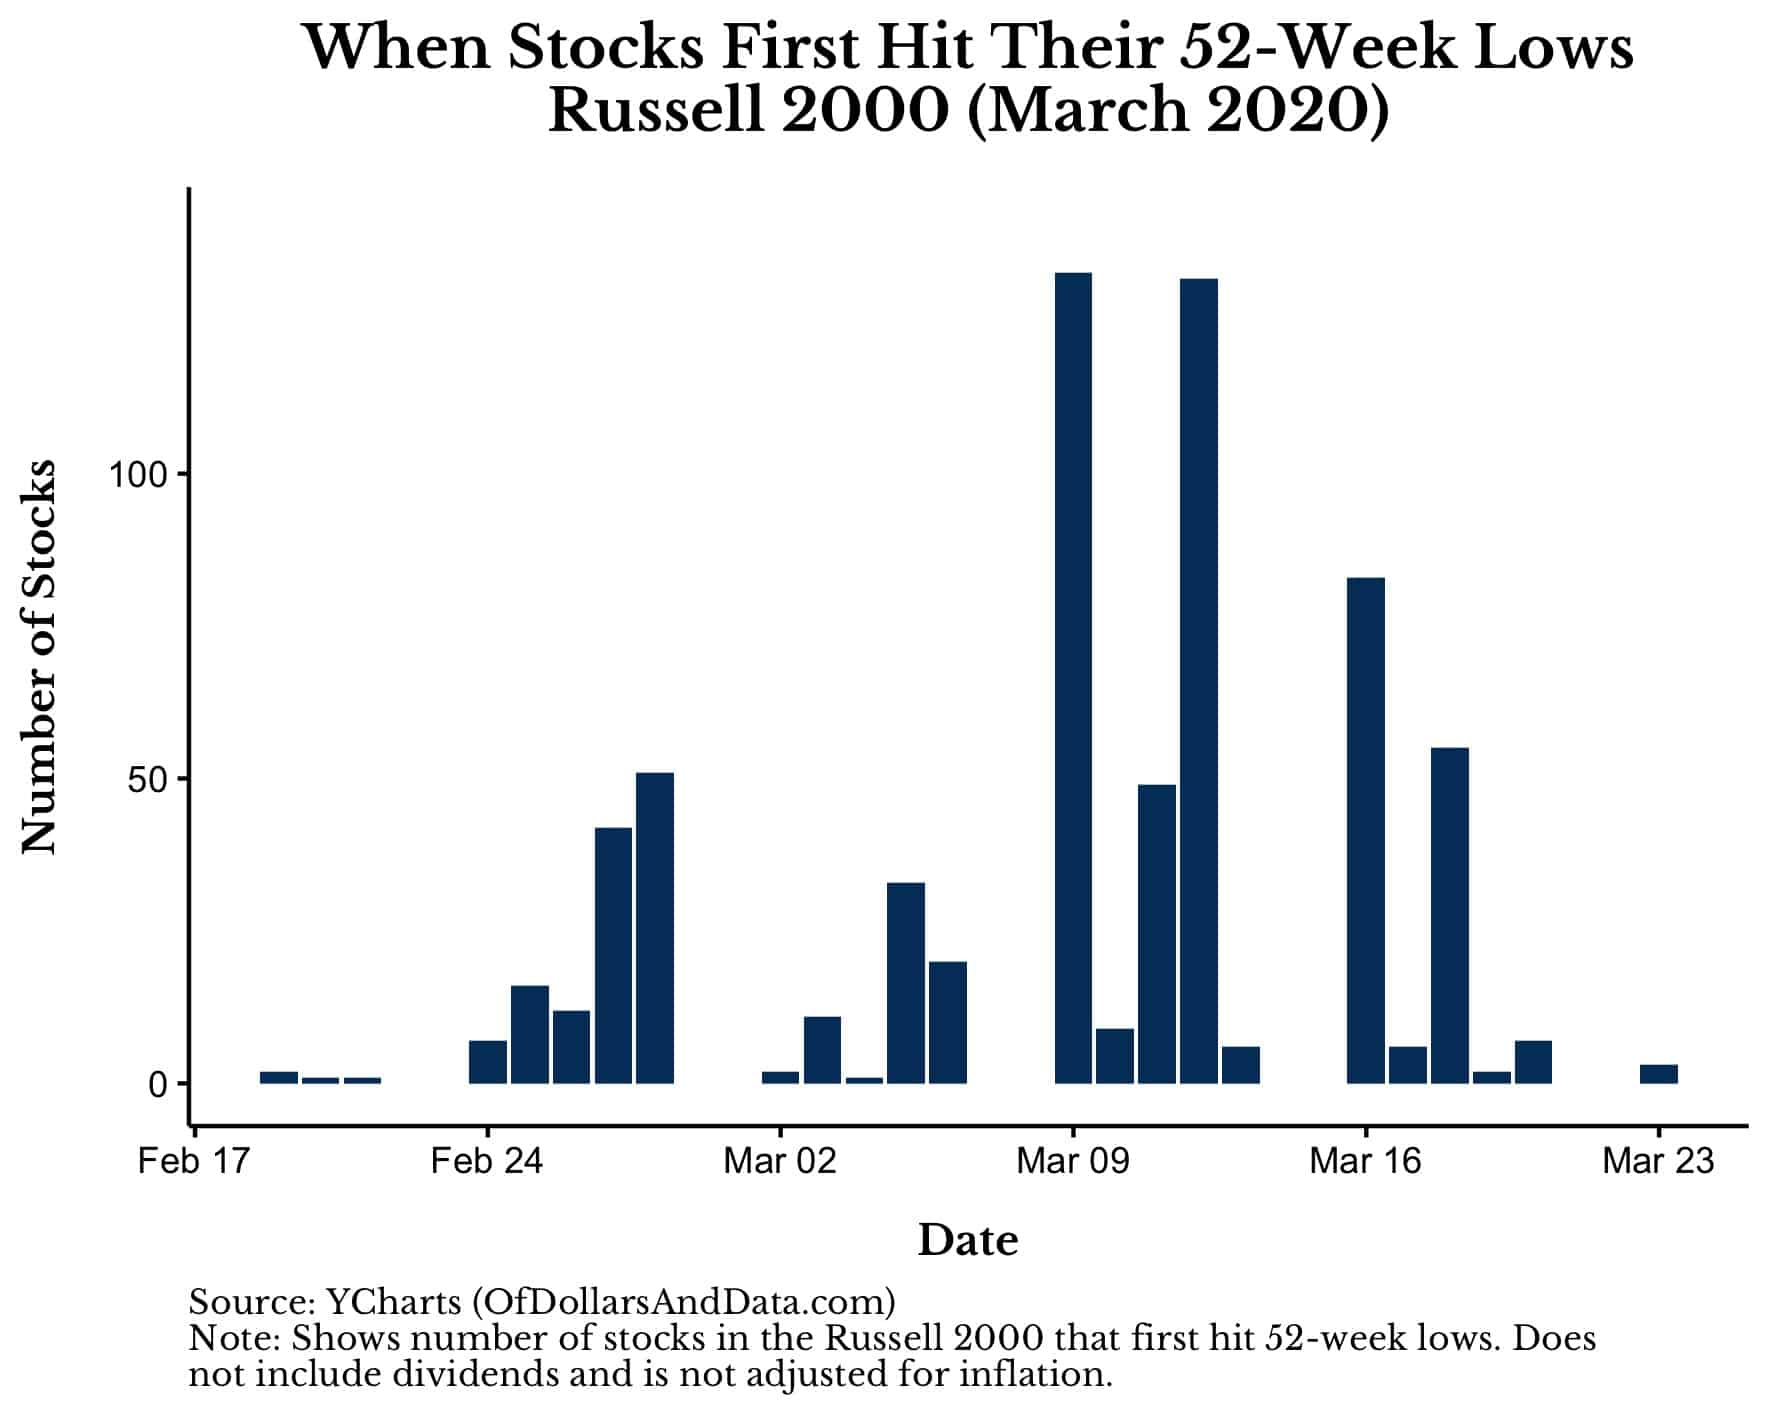 When Russell 2000 stocks first hit their 52-week lows around March 2020